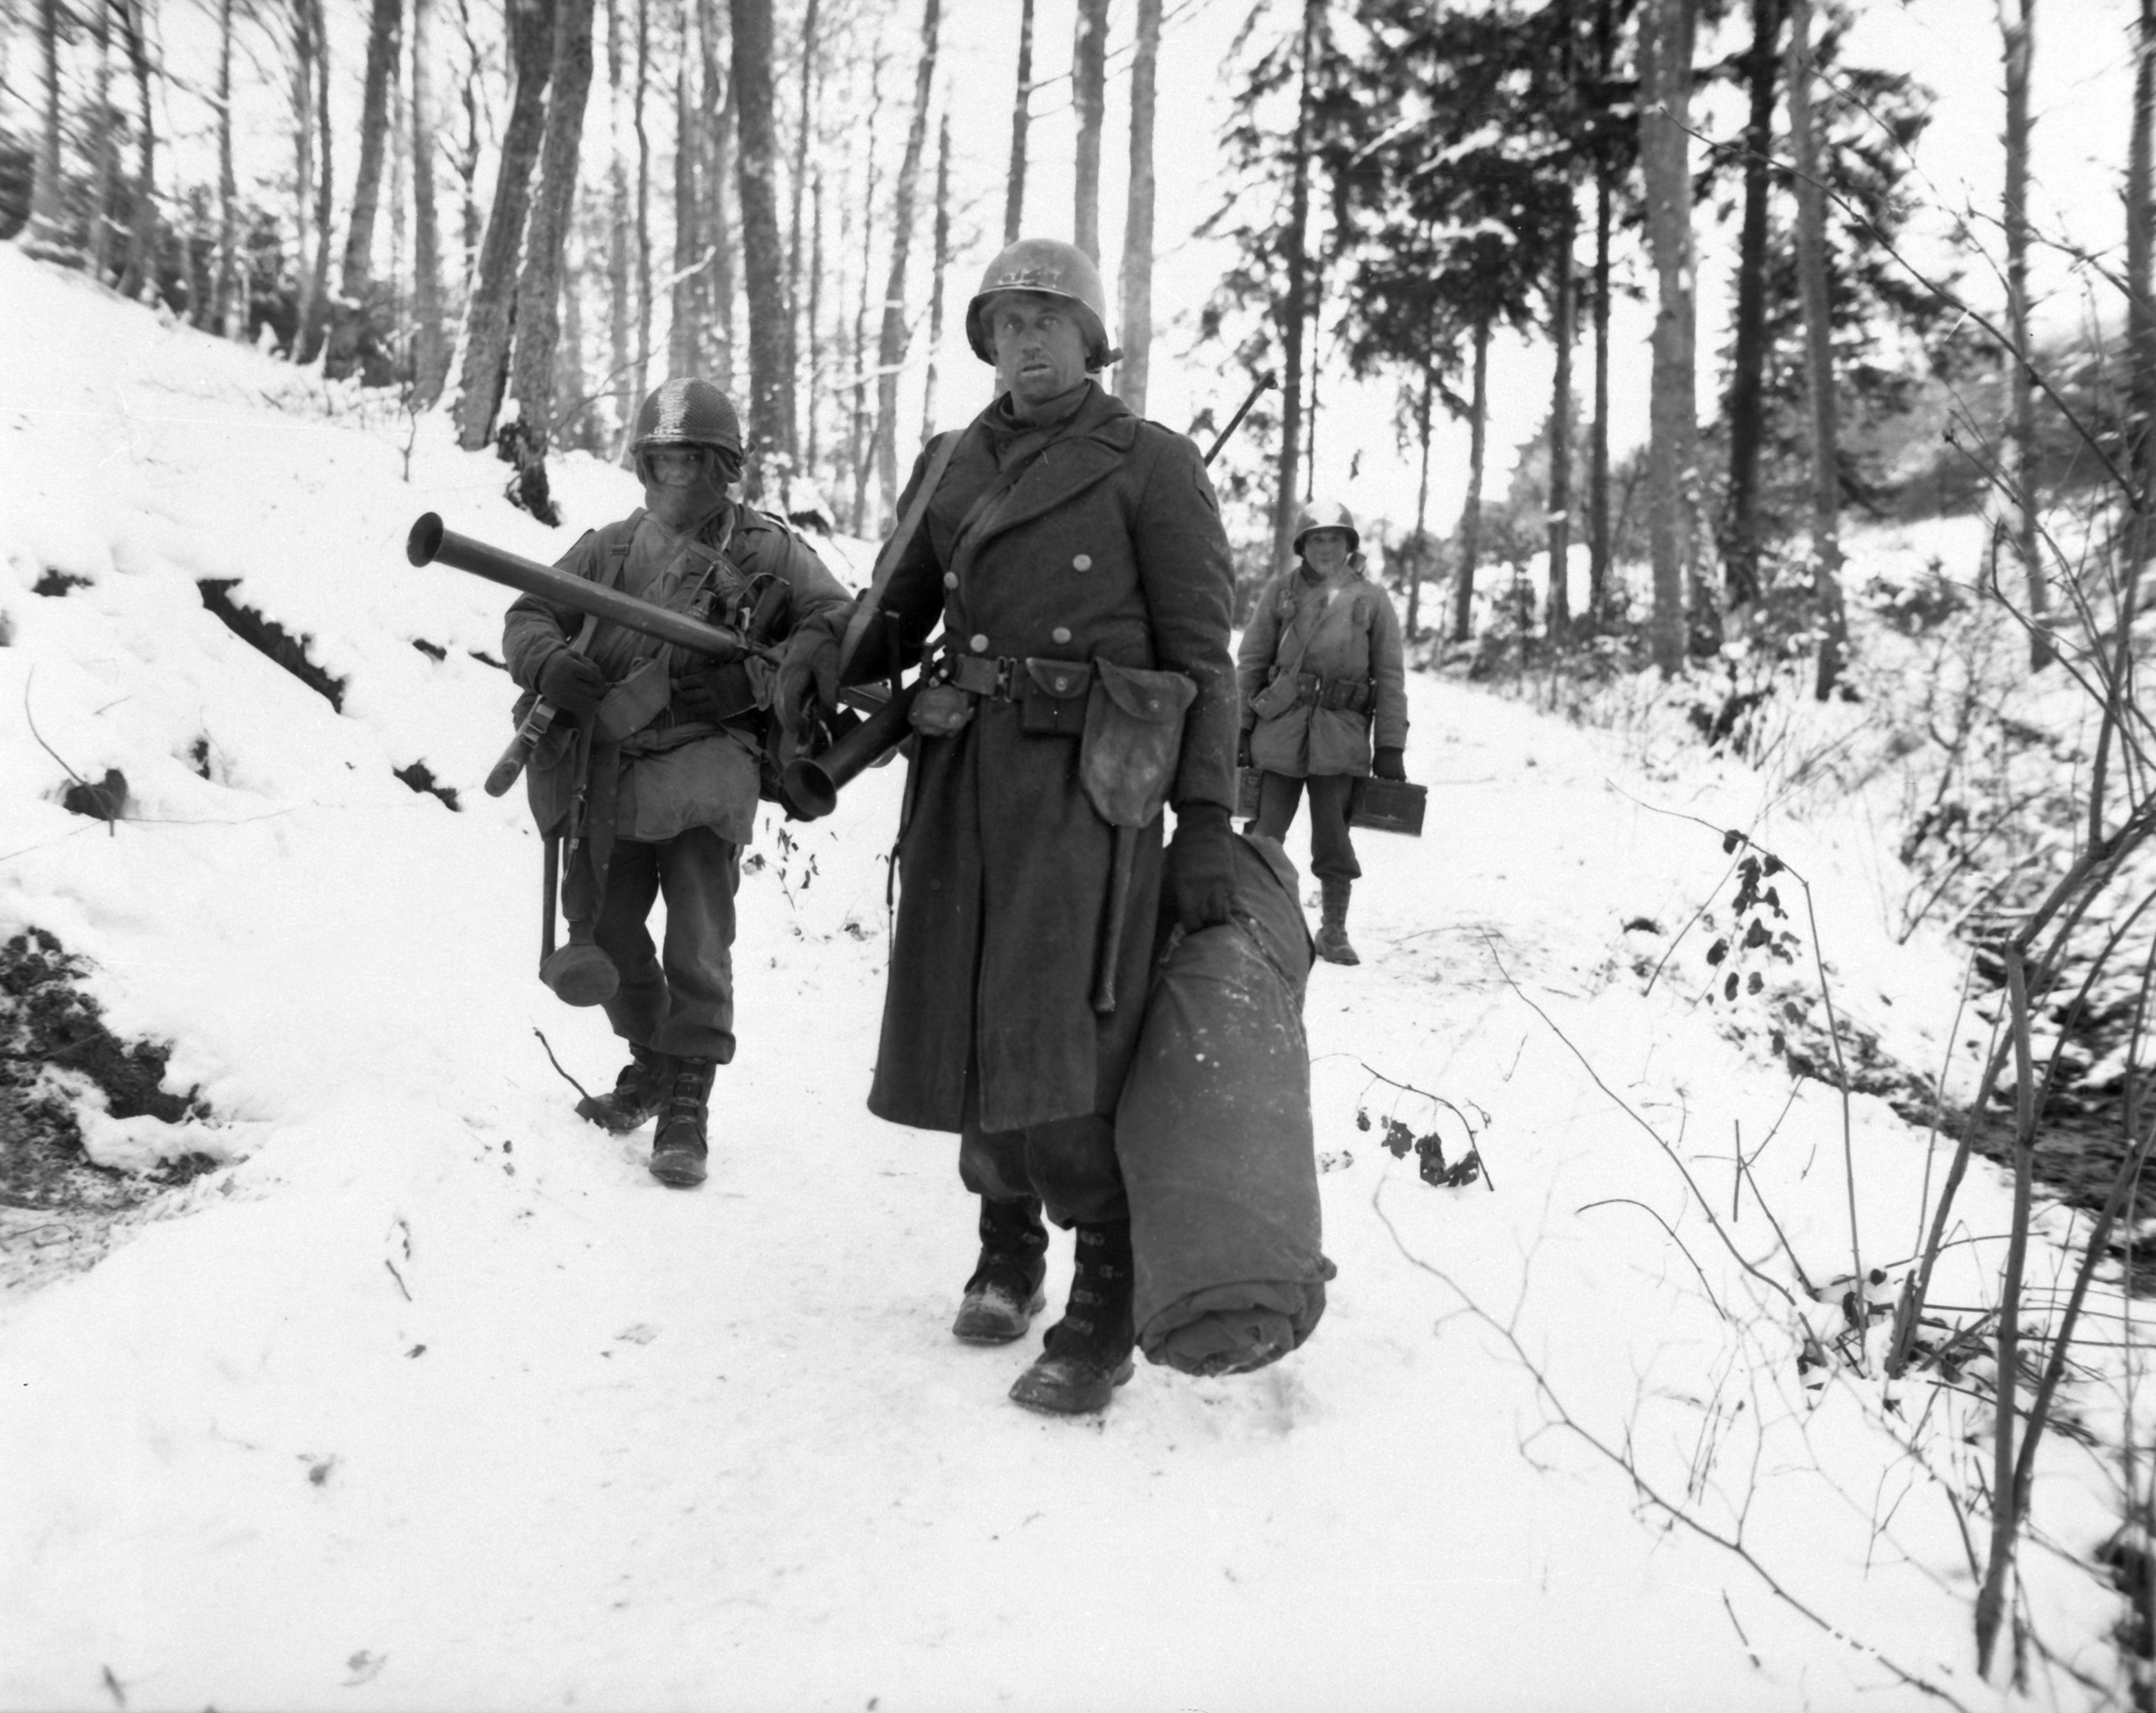 Battle Of The Bulge | The U.S. Army